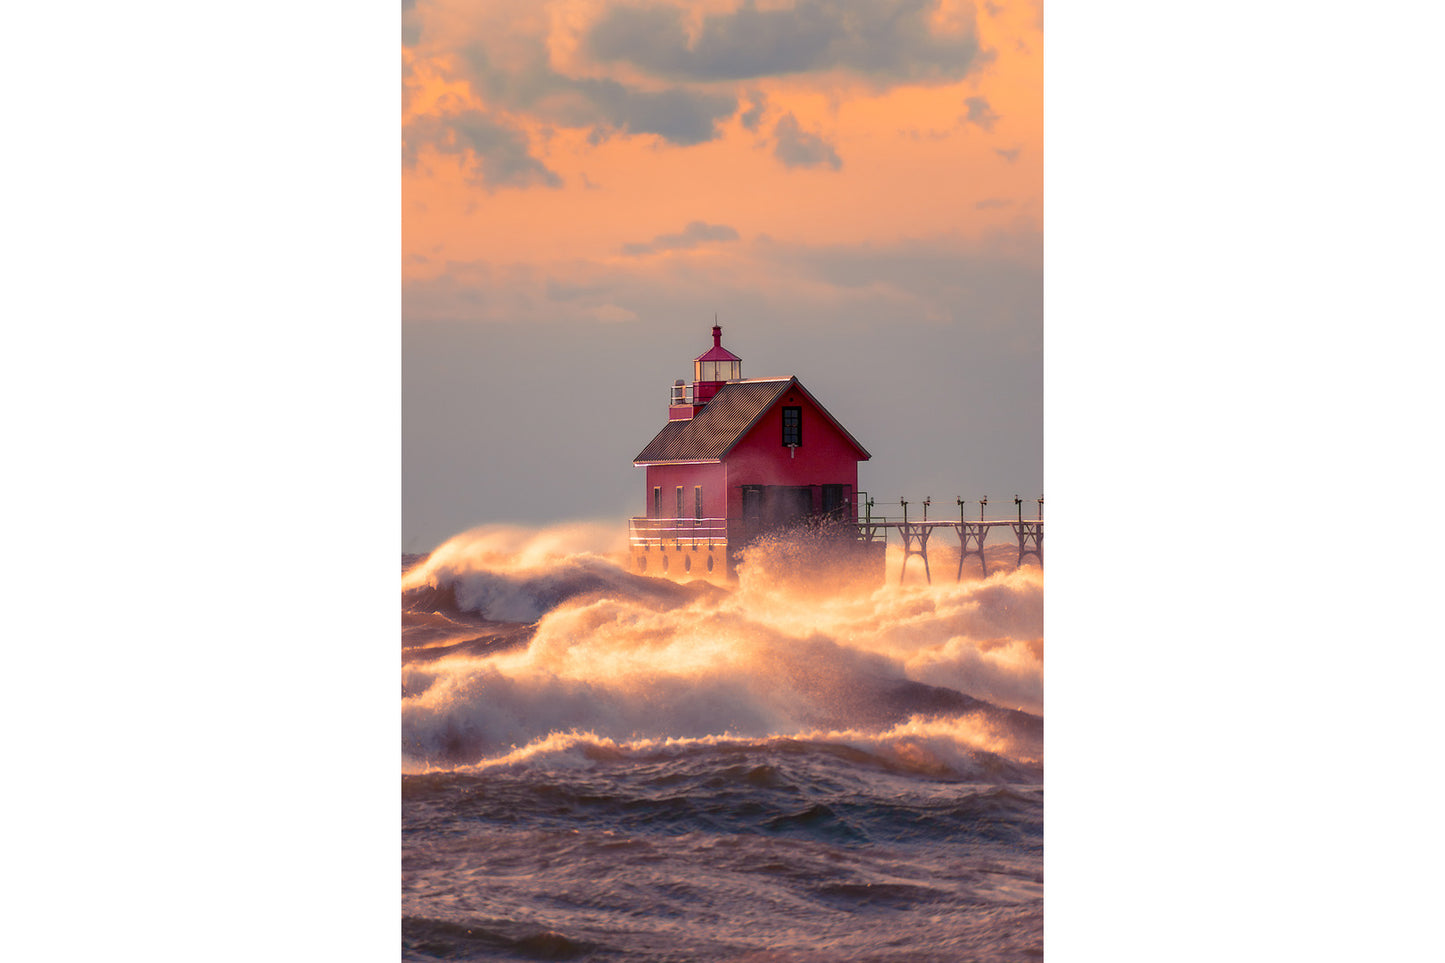 Grand Haven's Waves